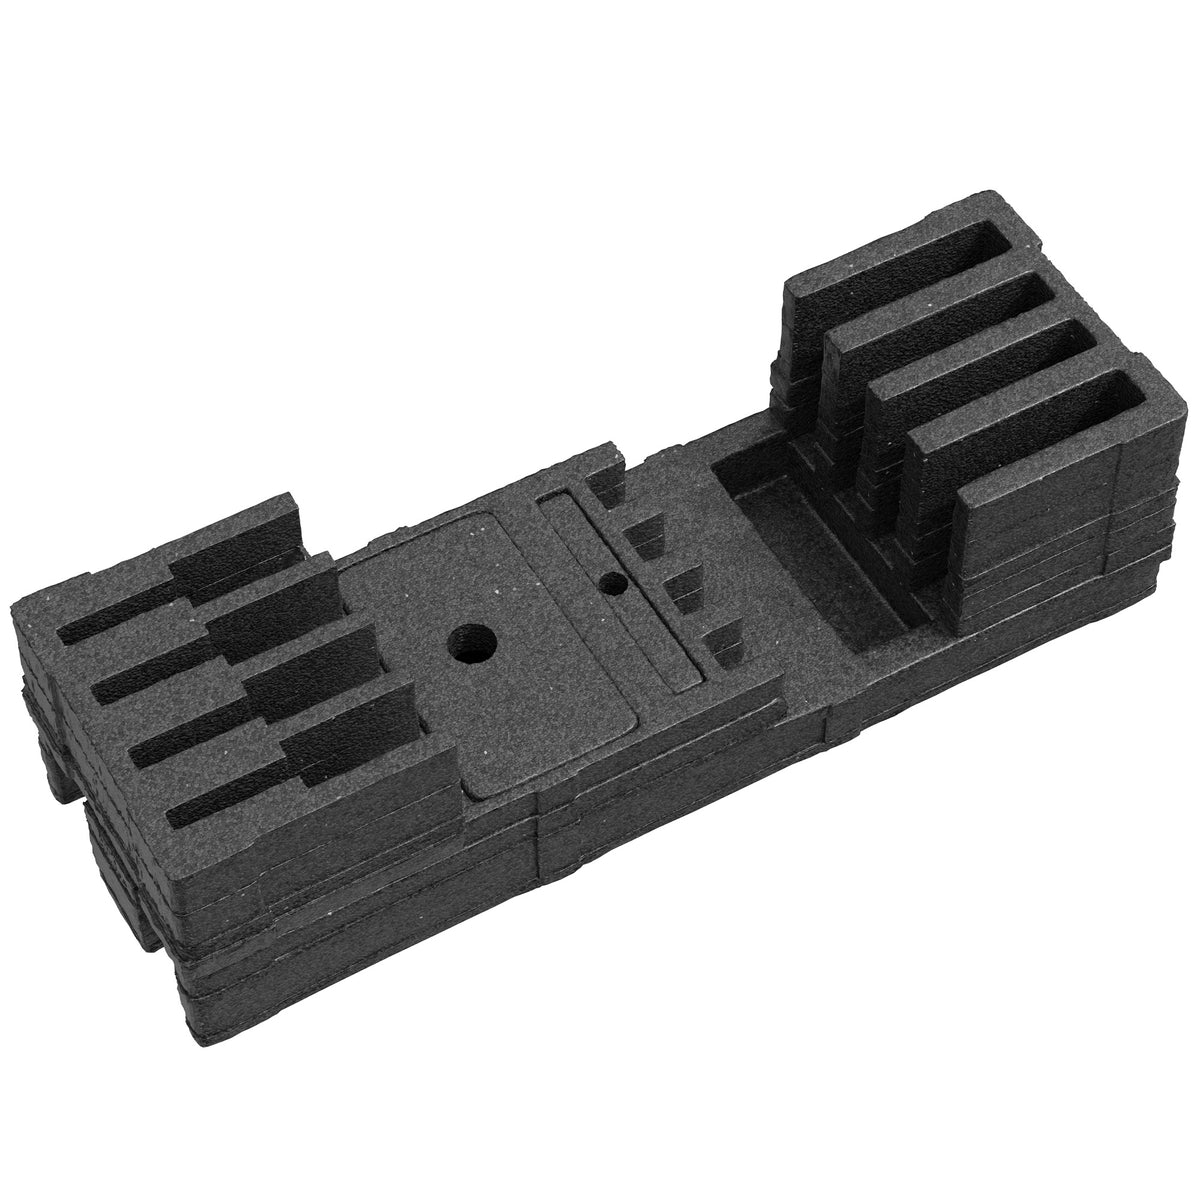 4 Slot Tactical Rifle Pre-Cut Insert for #2191 Case